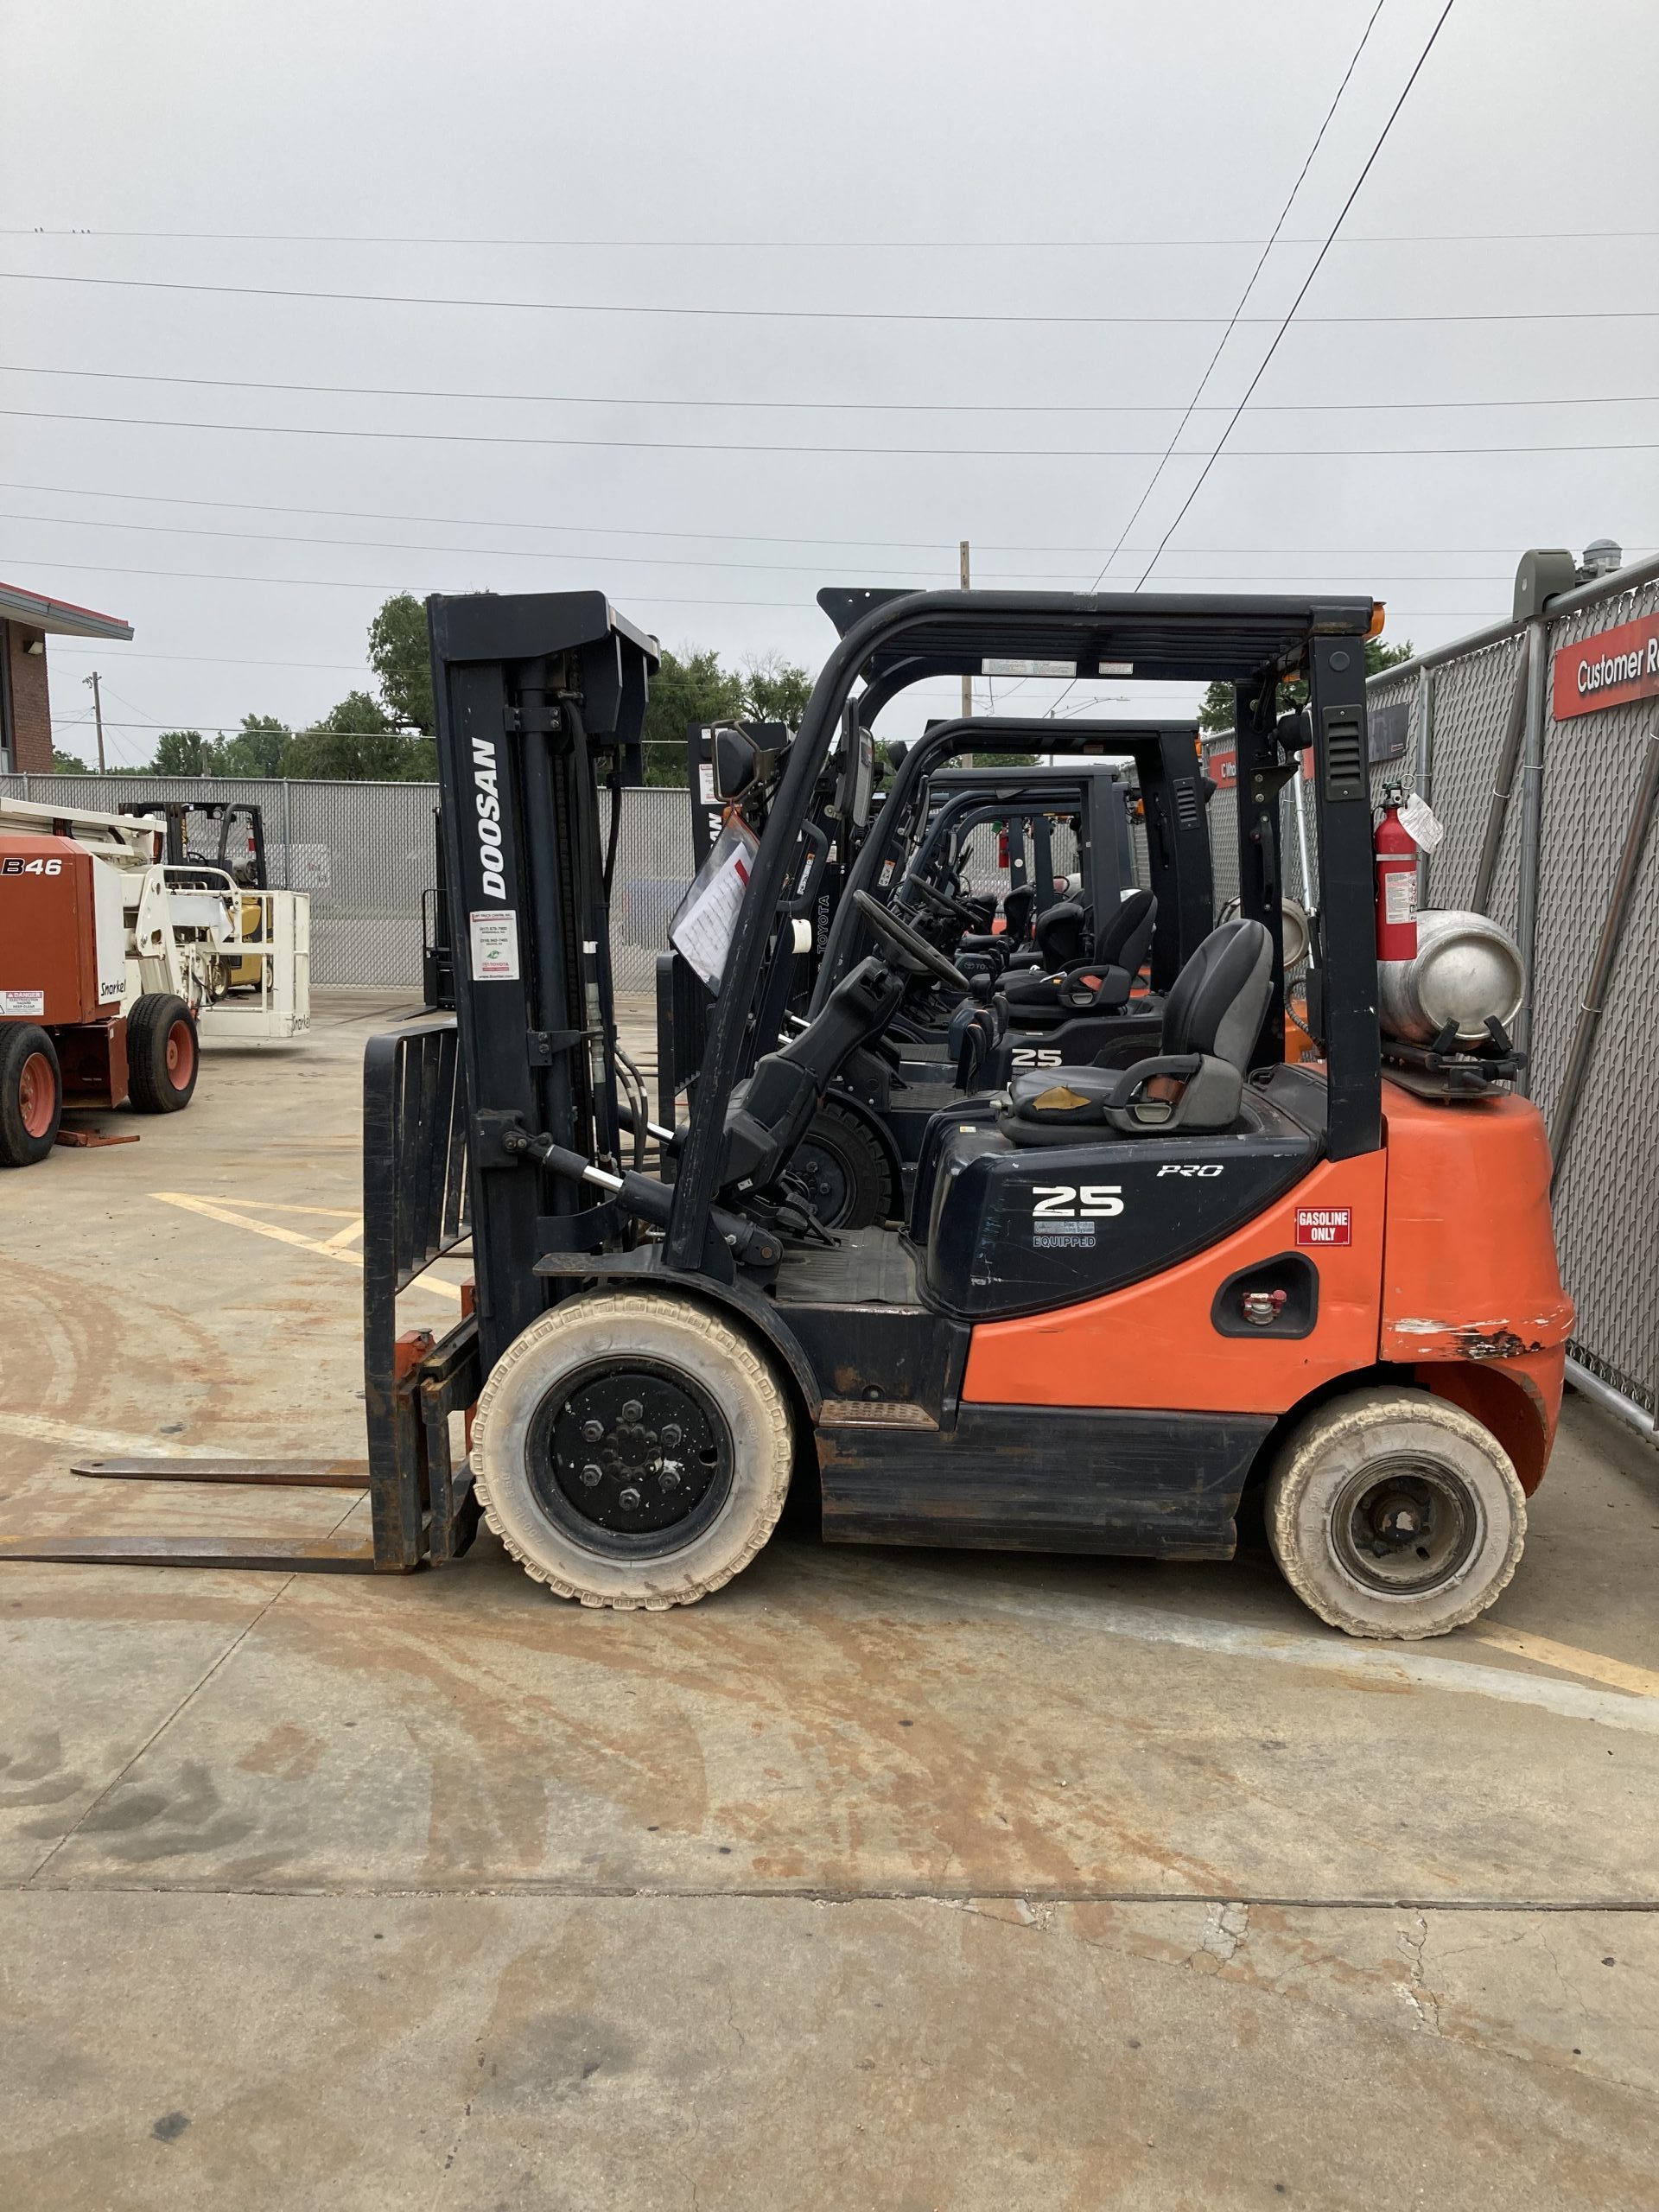 Featured image for “DOOSAN 5,000 LBS. CAPACITY PNEUMATIC TIRED FORKLIFT”